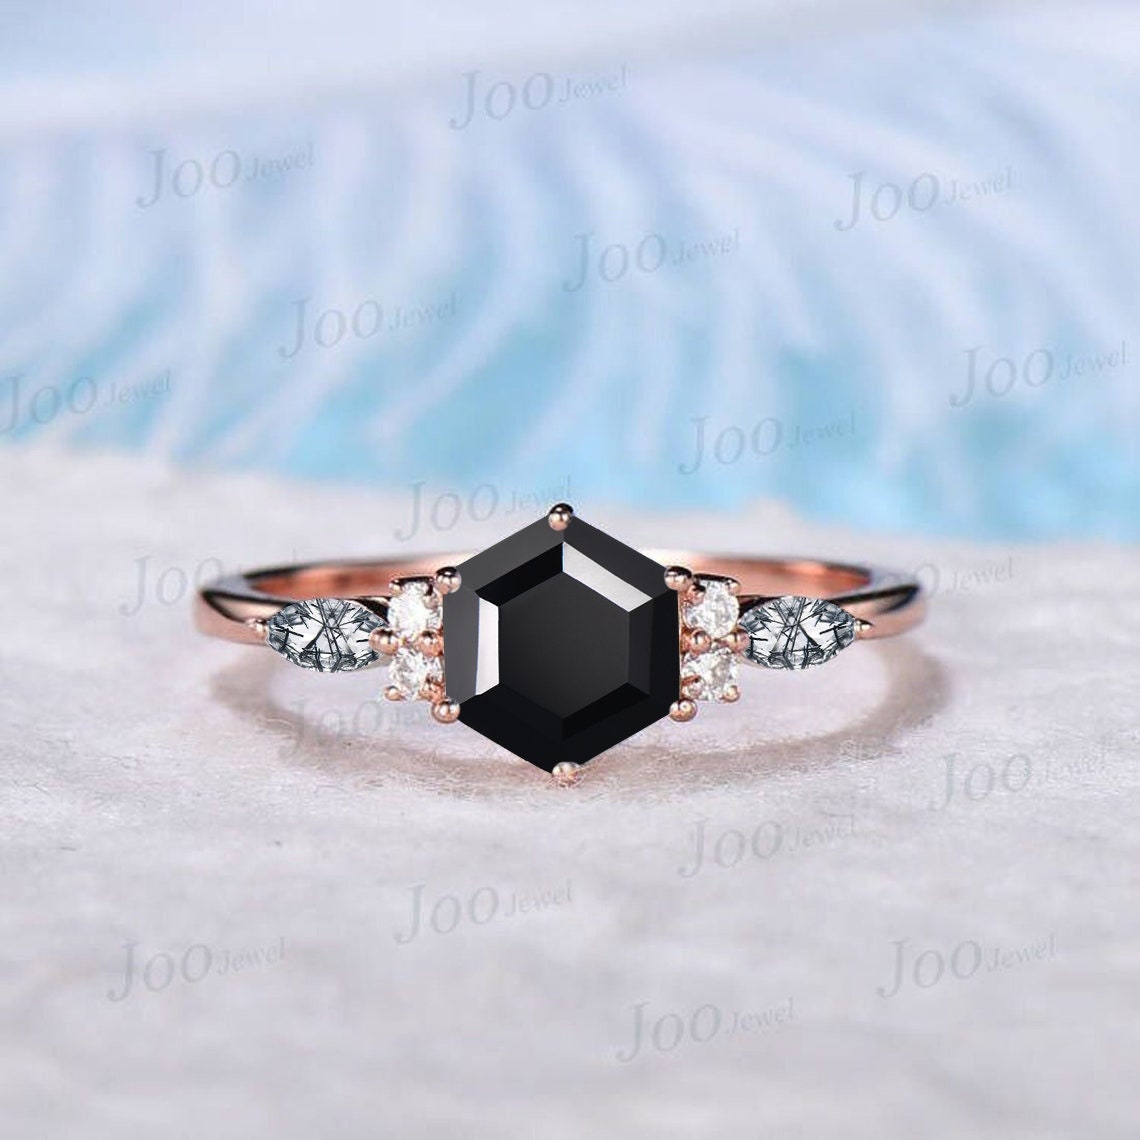 Natural Black Onyx Engagement Rings Women Unique Healing Crystal Ring Sterling Silver Marquise Black Rutilated Quartz Ring Black Stone Ring